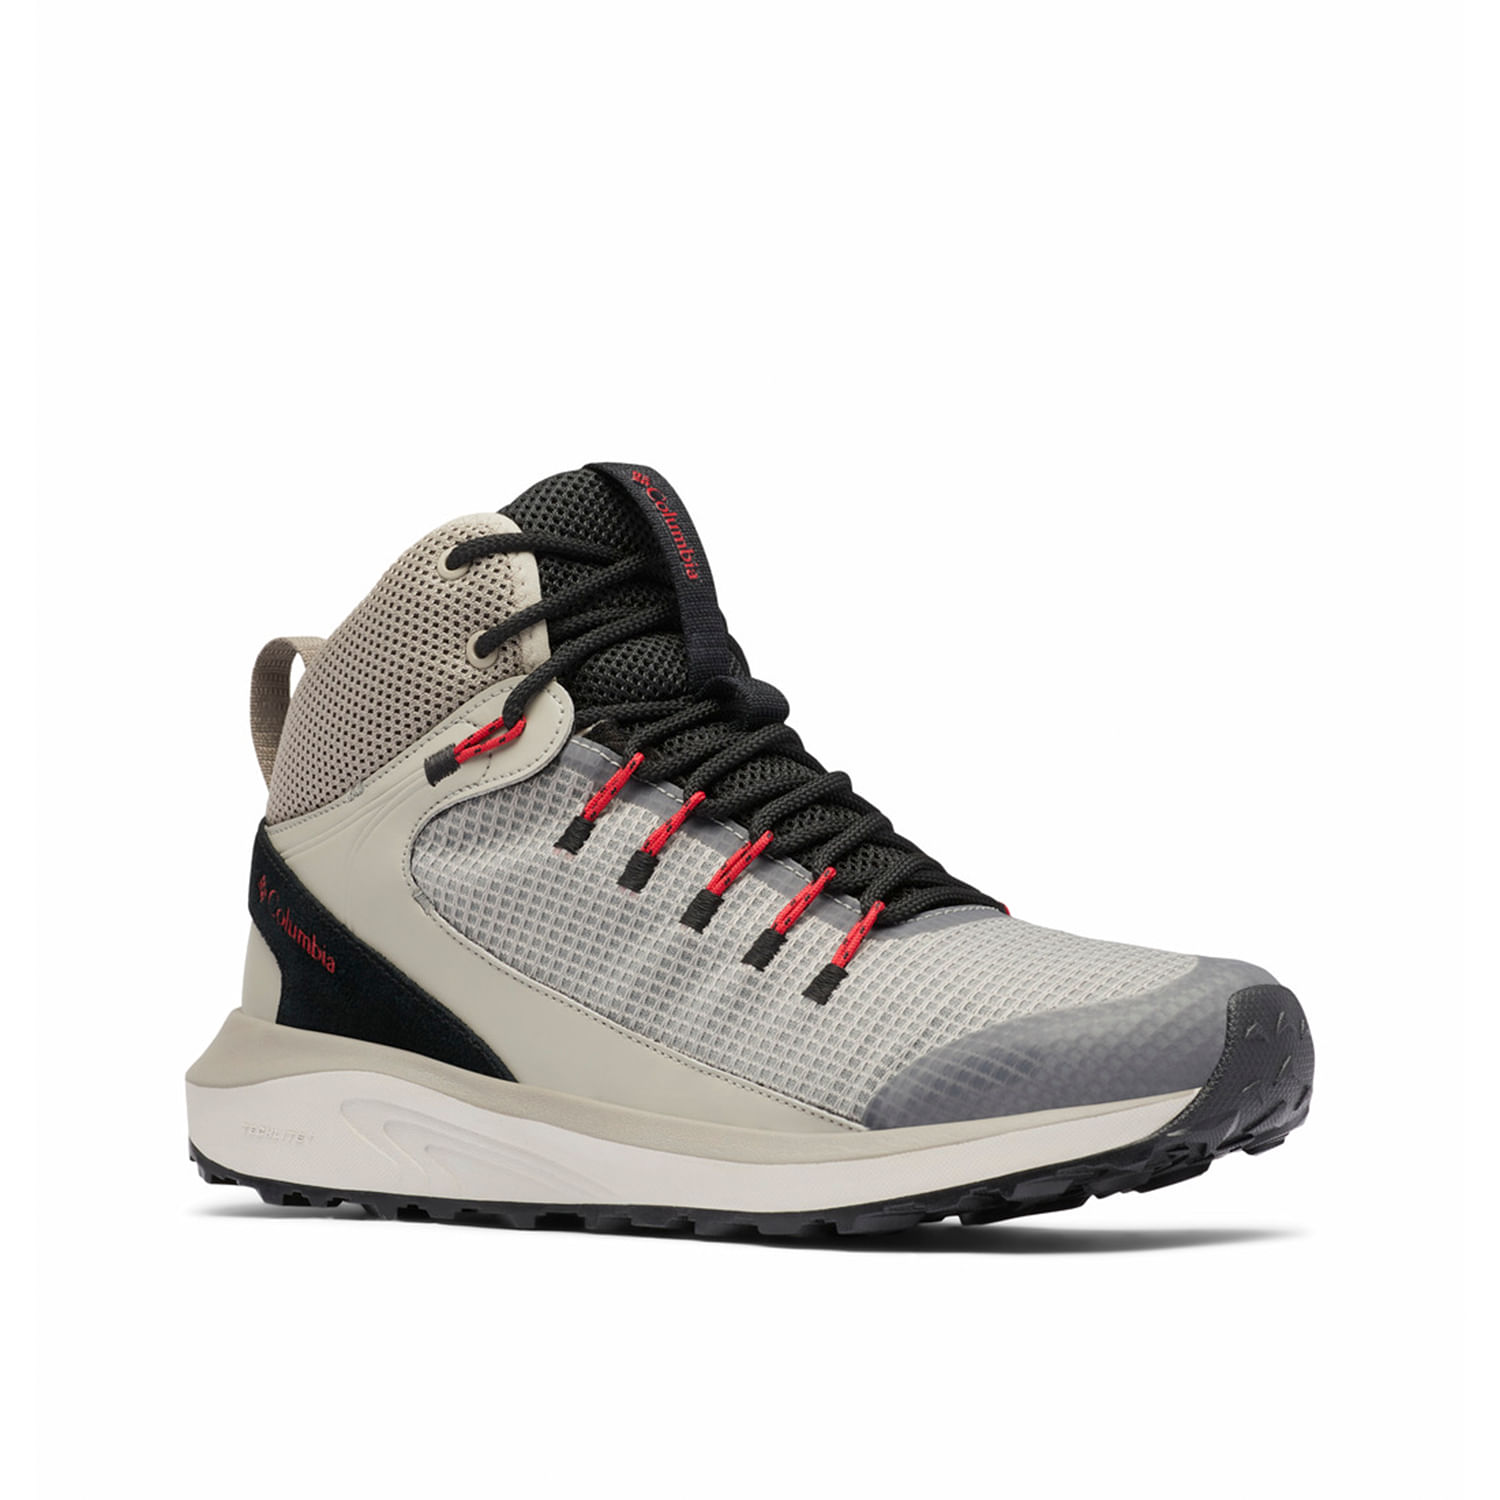 ZAPATILLA COLUMBIA CANION POINT MID WATERPROOF HOMBRE